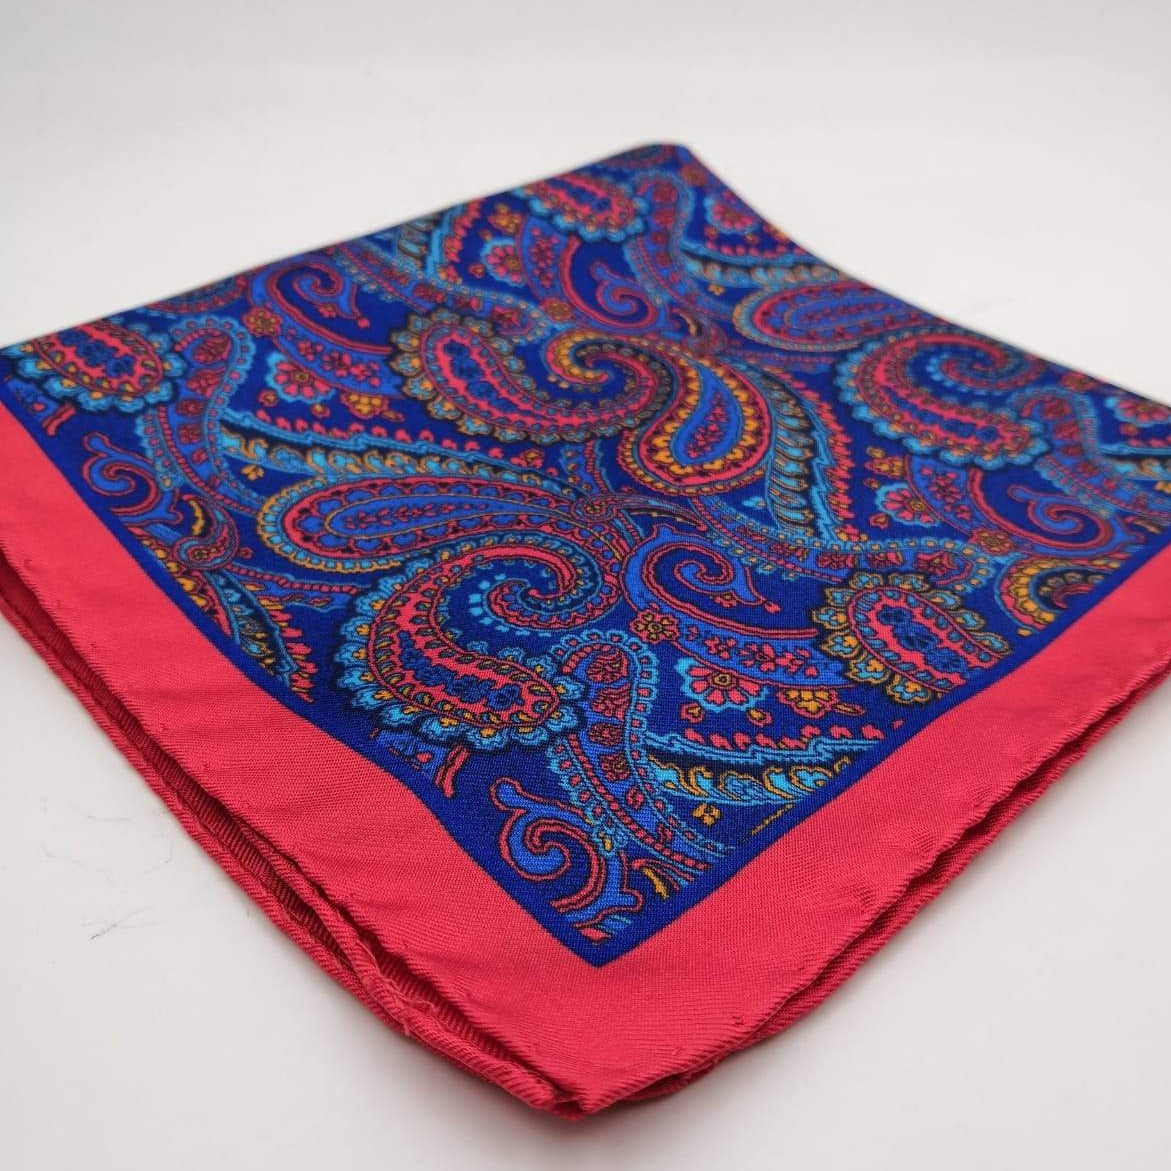 Cruciani & Bella 100% Silk Hand-rolled  Red  and Multicolor Paisley Motif  Pocket Square Handmade in Italy 34cm X 34cm #0729